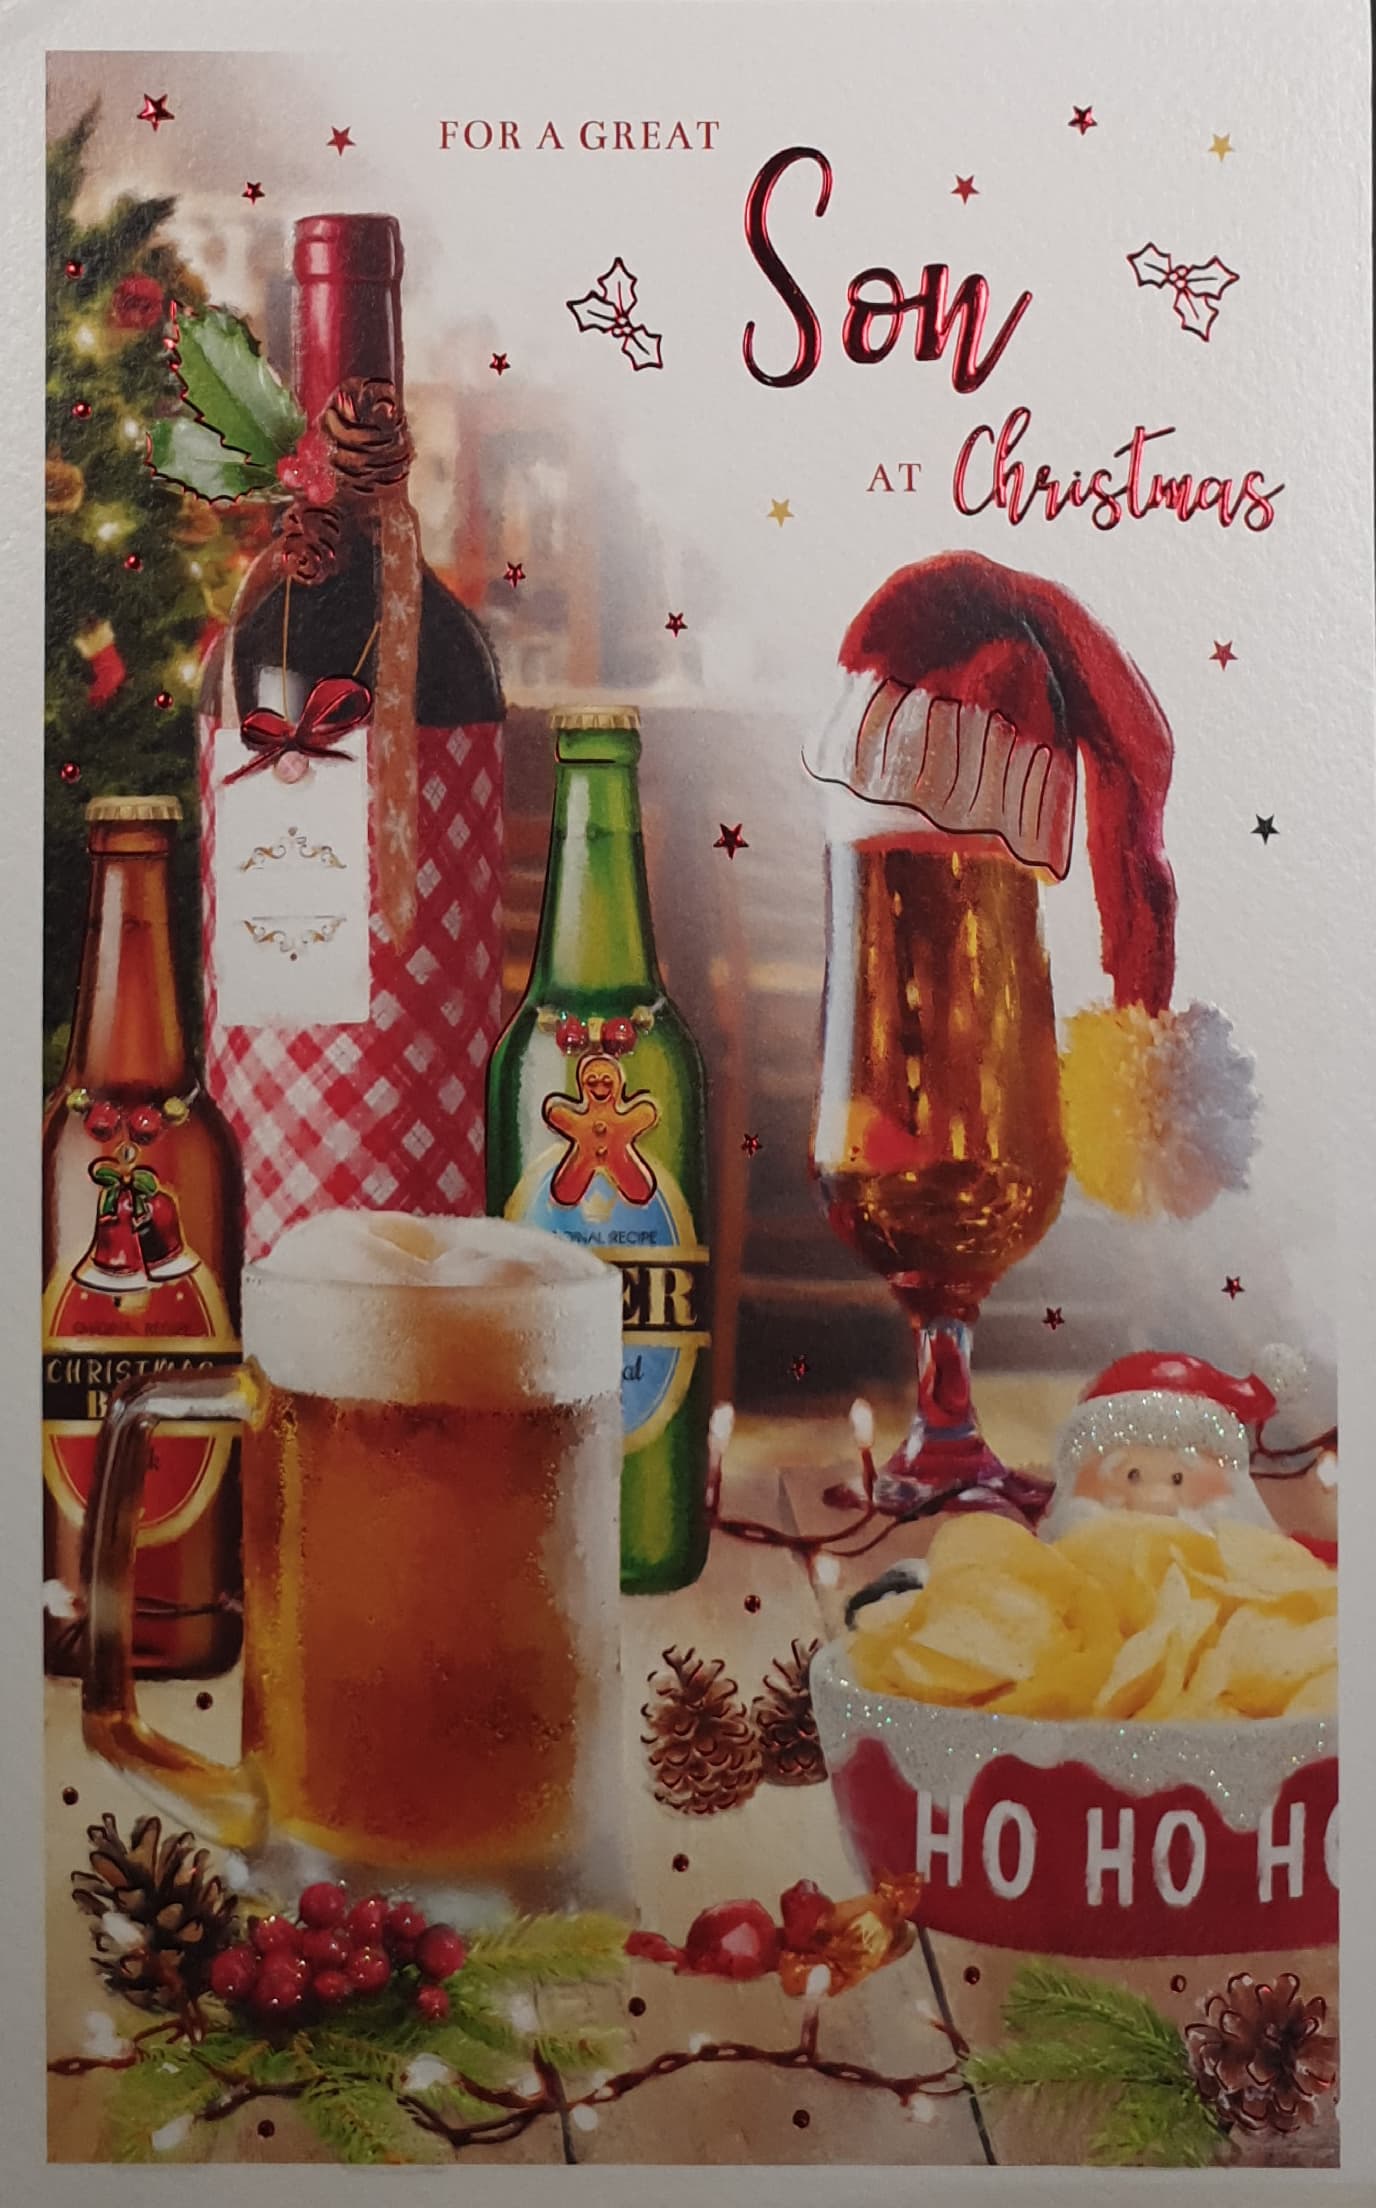 Son Christmas Card - Beer & Crisps on Decorated Table